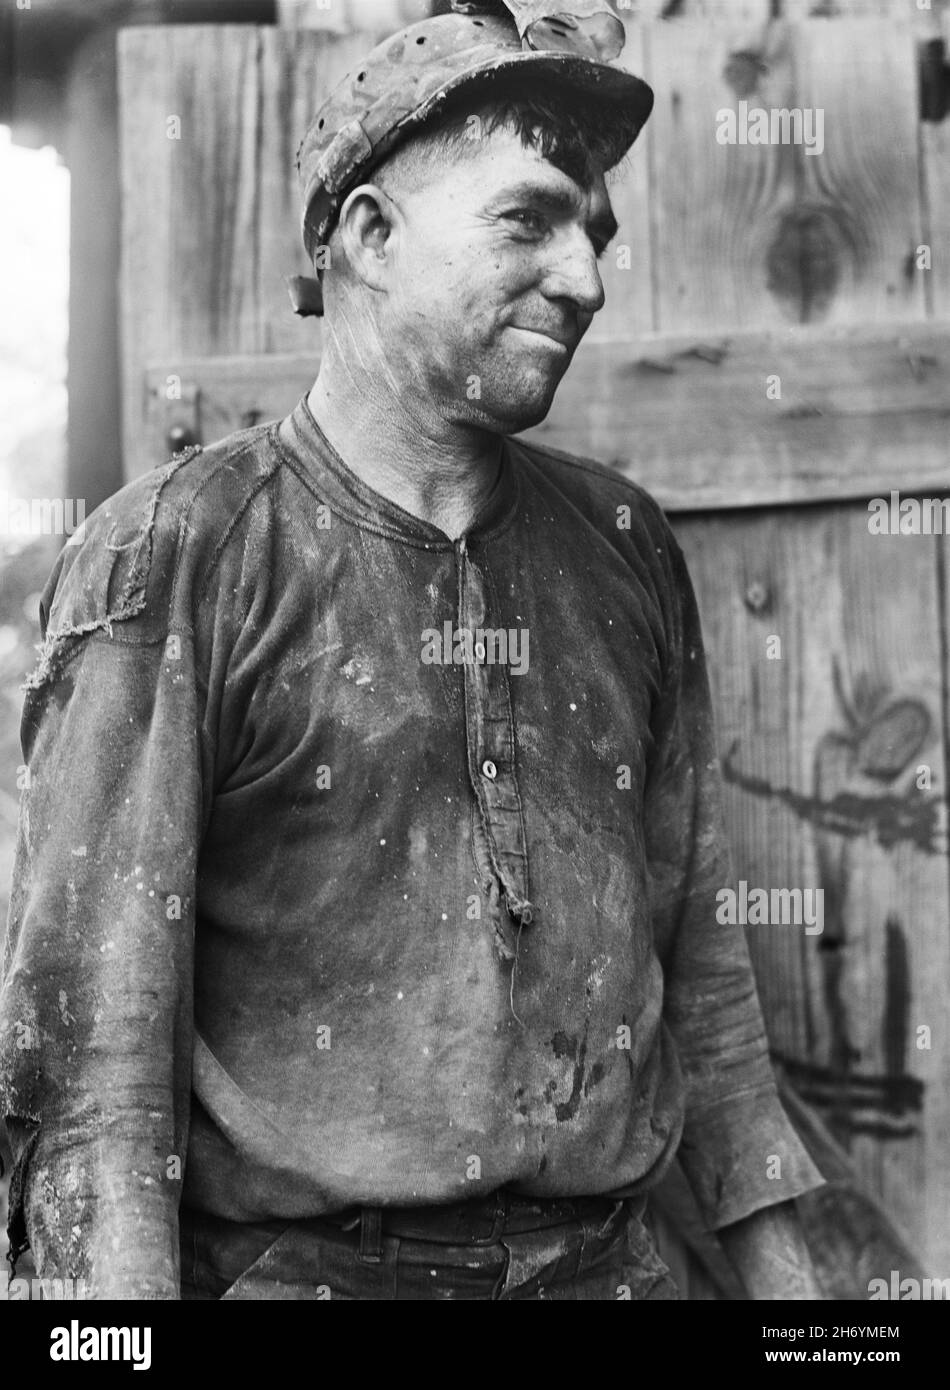 Miner, who also runs a Farm, at end of workday, Dougherty's Mine, near Falls Creek, Pennsylvania, USA, Jack Delano, U.S. Farm Security Administration, U.S. Office of War Information Photograph Collection, August 1940 Stock Photo